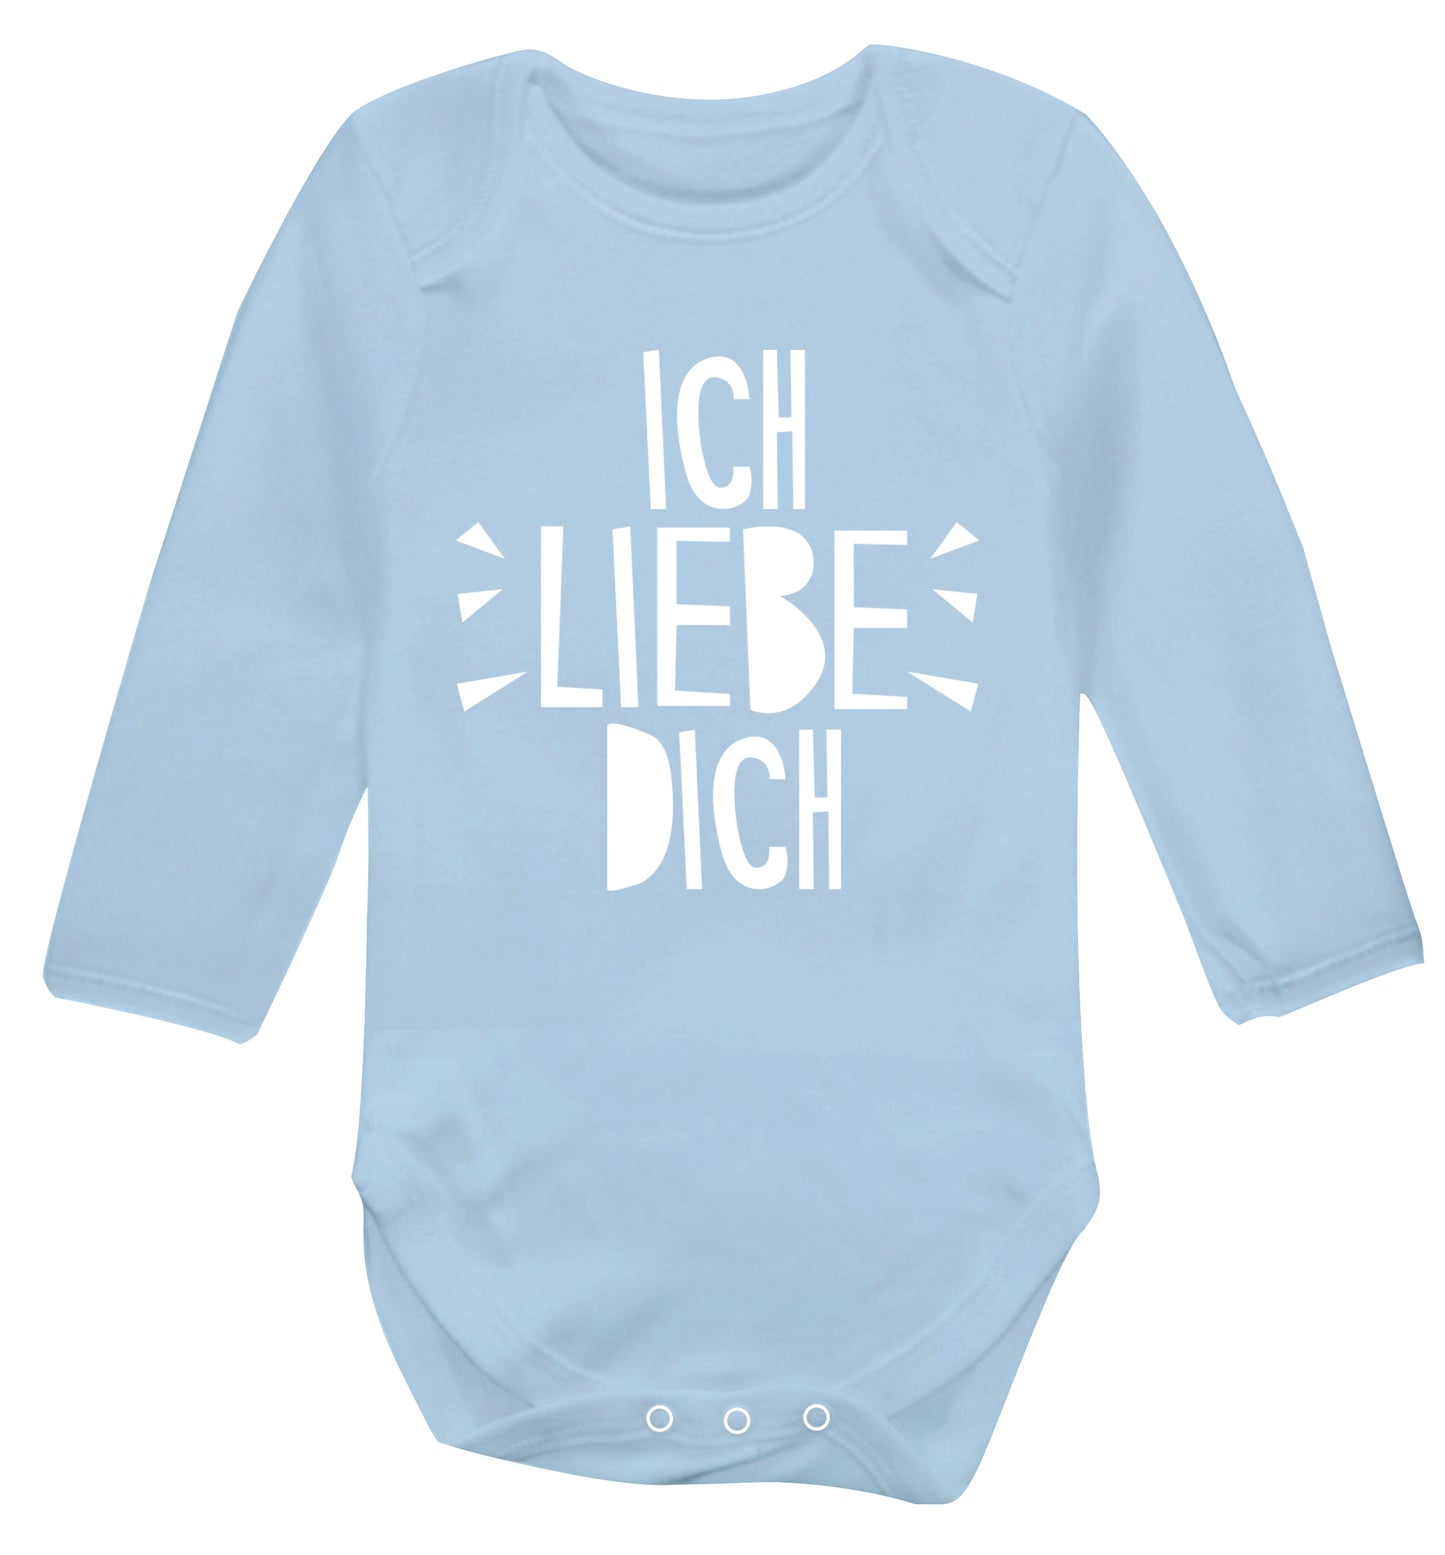 Ich liebe dich - I love you Baby Vest long sleeved pale blue 6-12 months